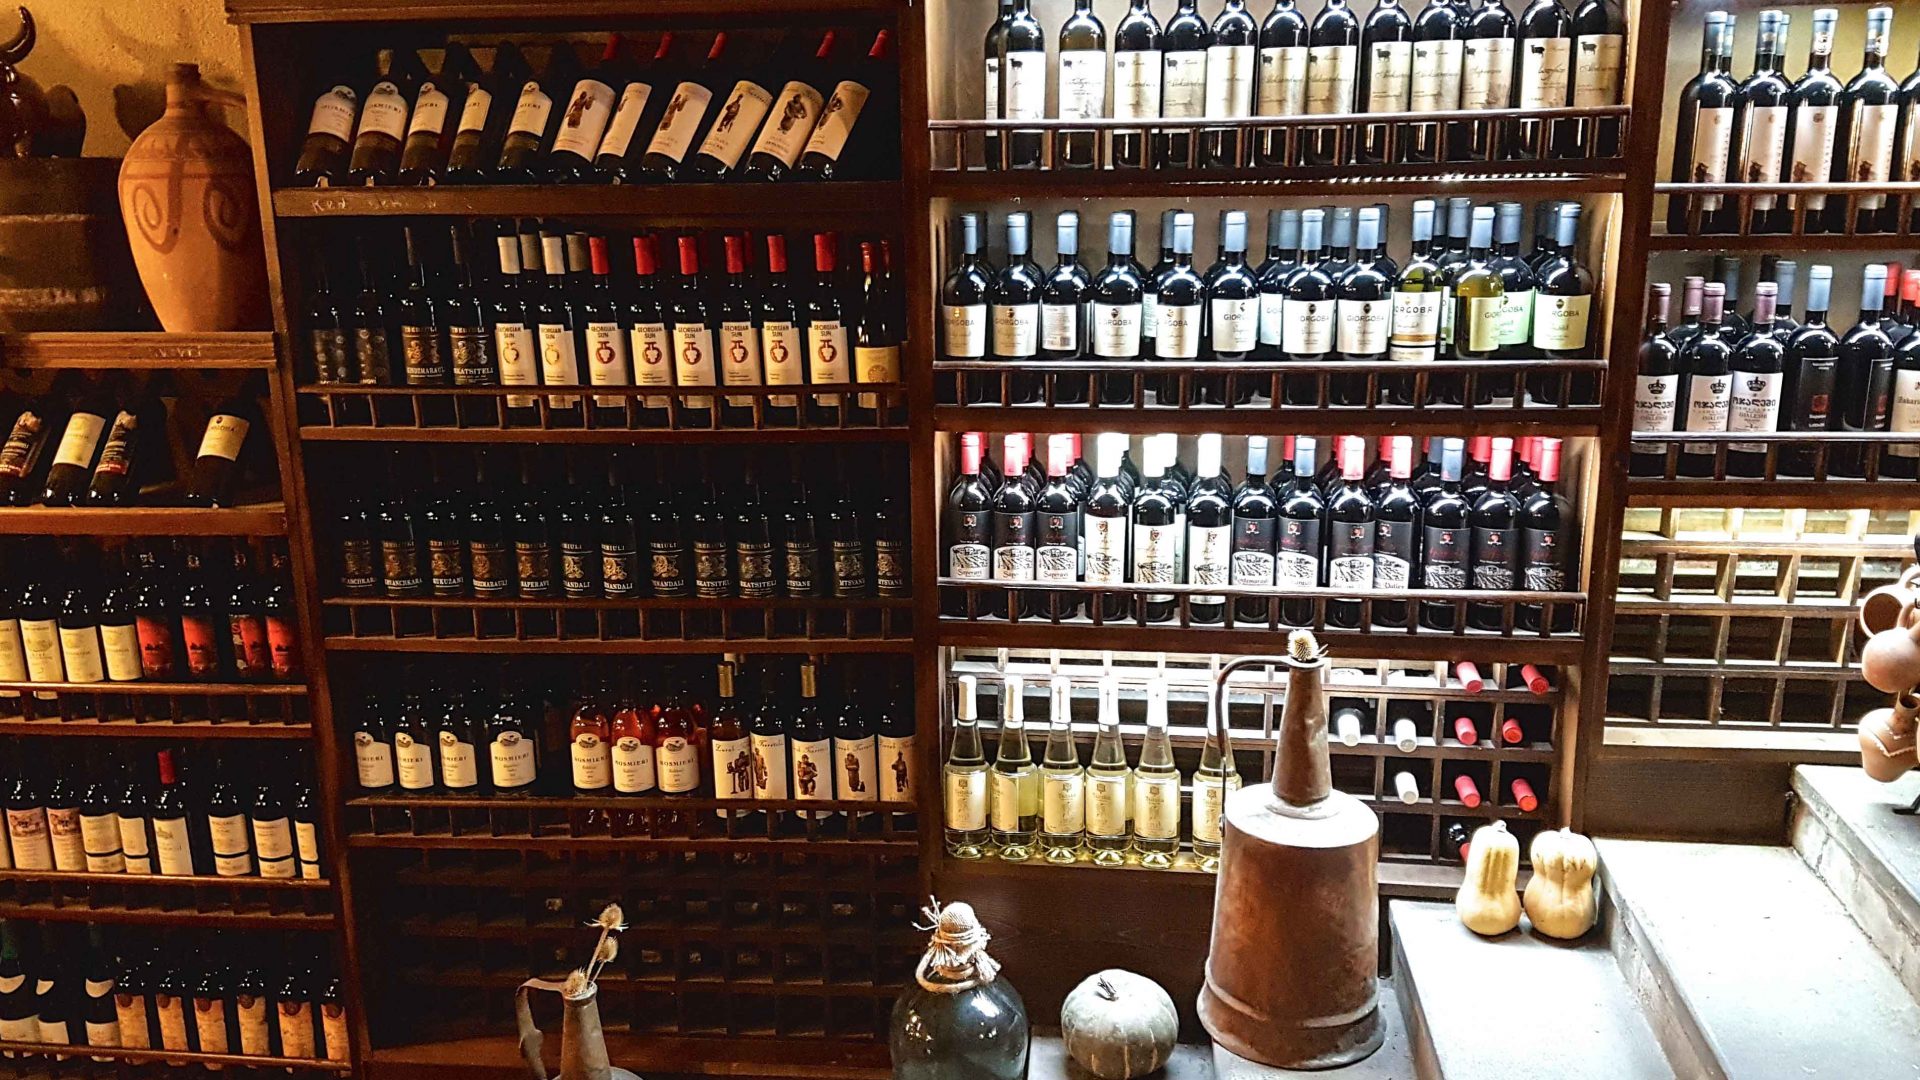 Famous Georgian natural wines displayed on a shelf.